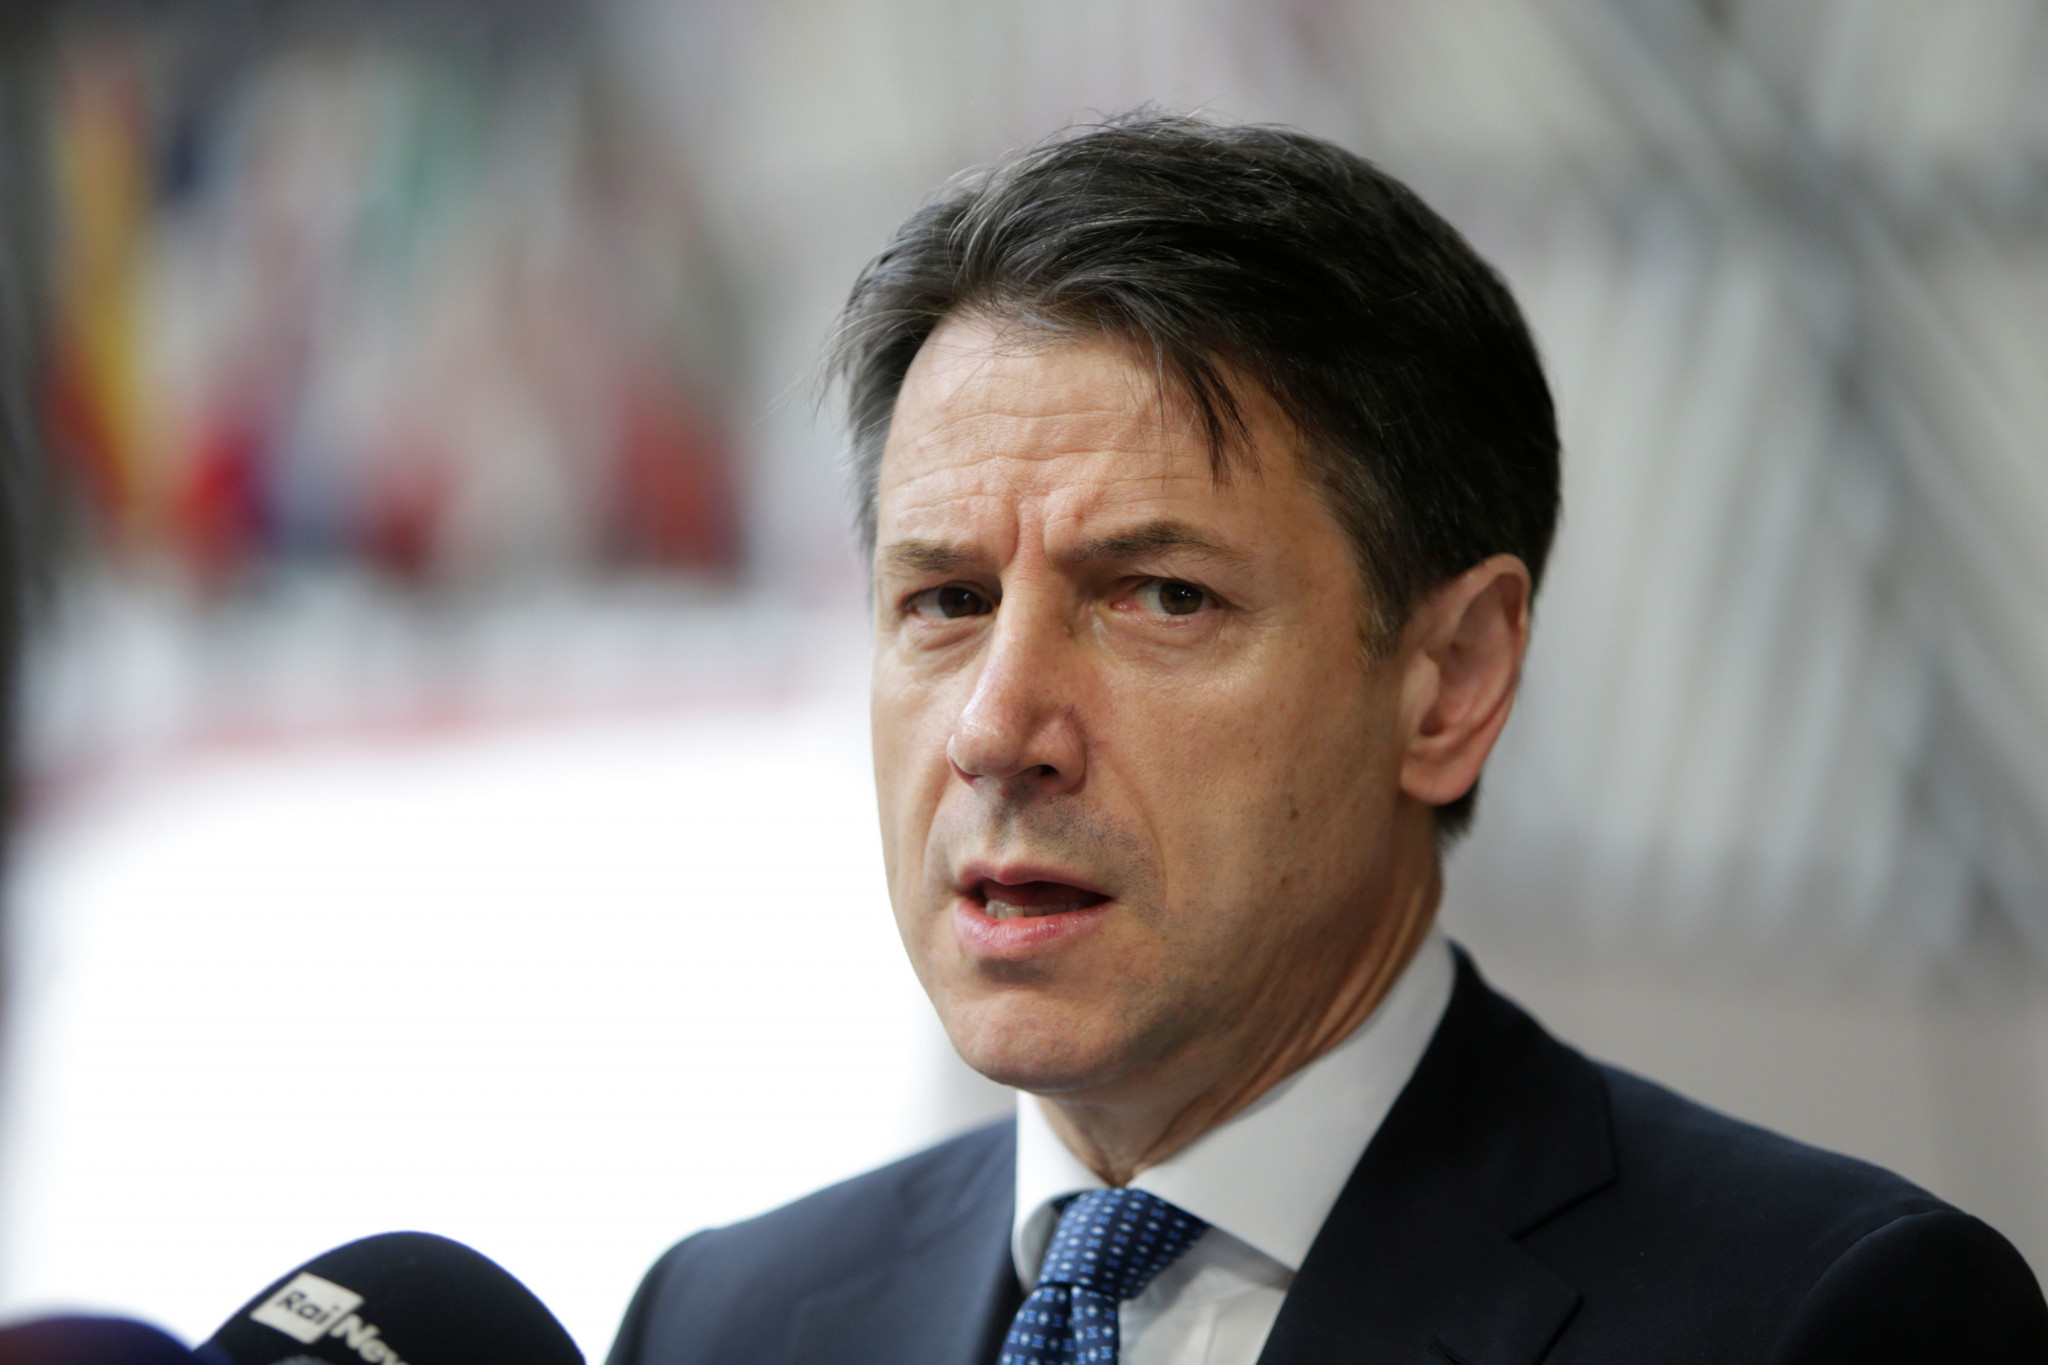 Italian Prime Minister Giuseppe Conte is among those who will attend the Session to support Milan Cortina 2026 ©Getty Images